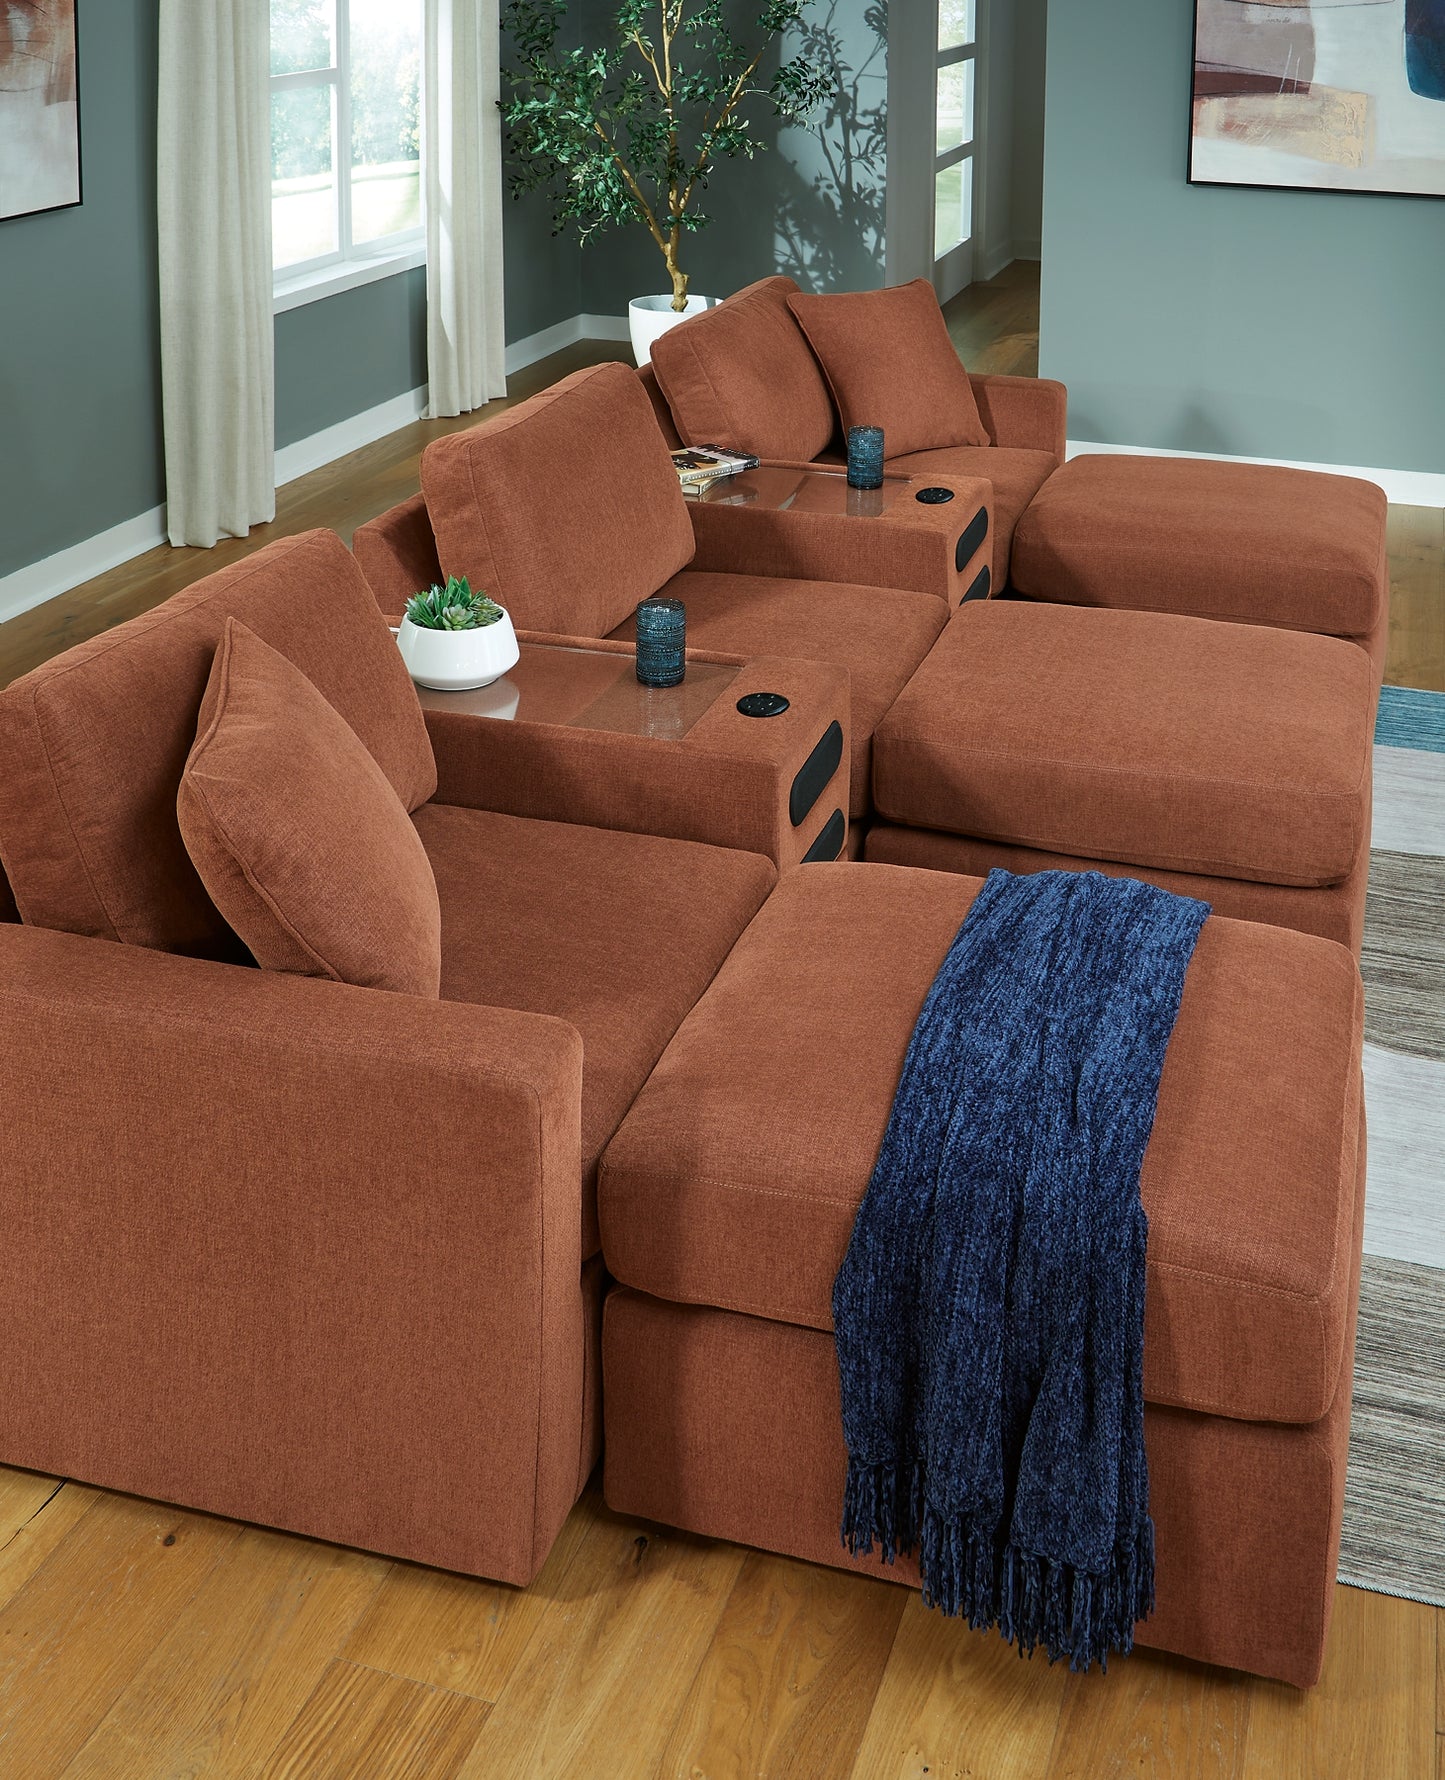 Modmax 5-Piece Sectional with Ottoman